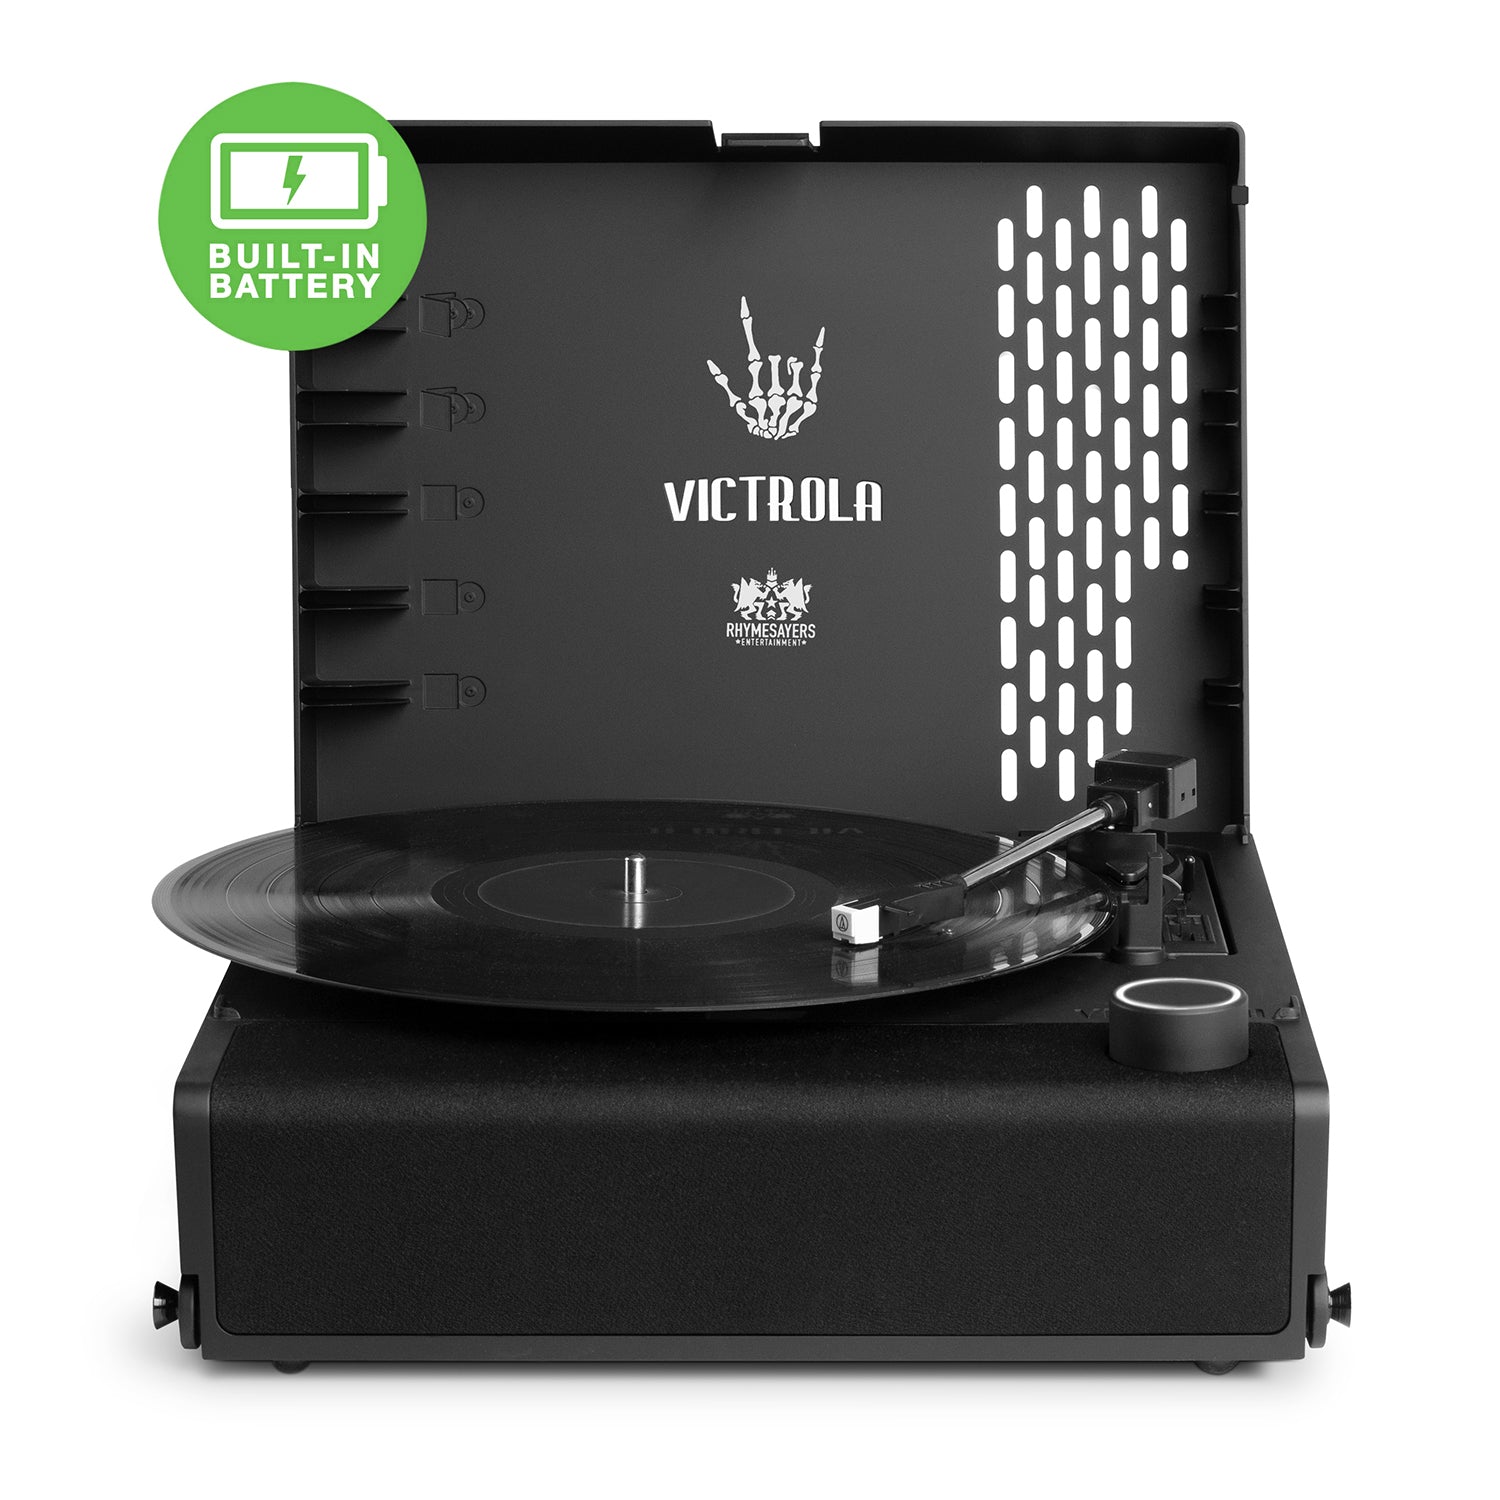 ATMOSPHERE x VICTROLA "REVOLUTION GO" LIMITED EDITION TURNTABLE